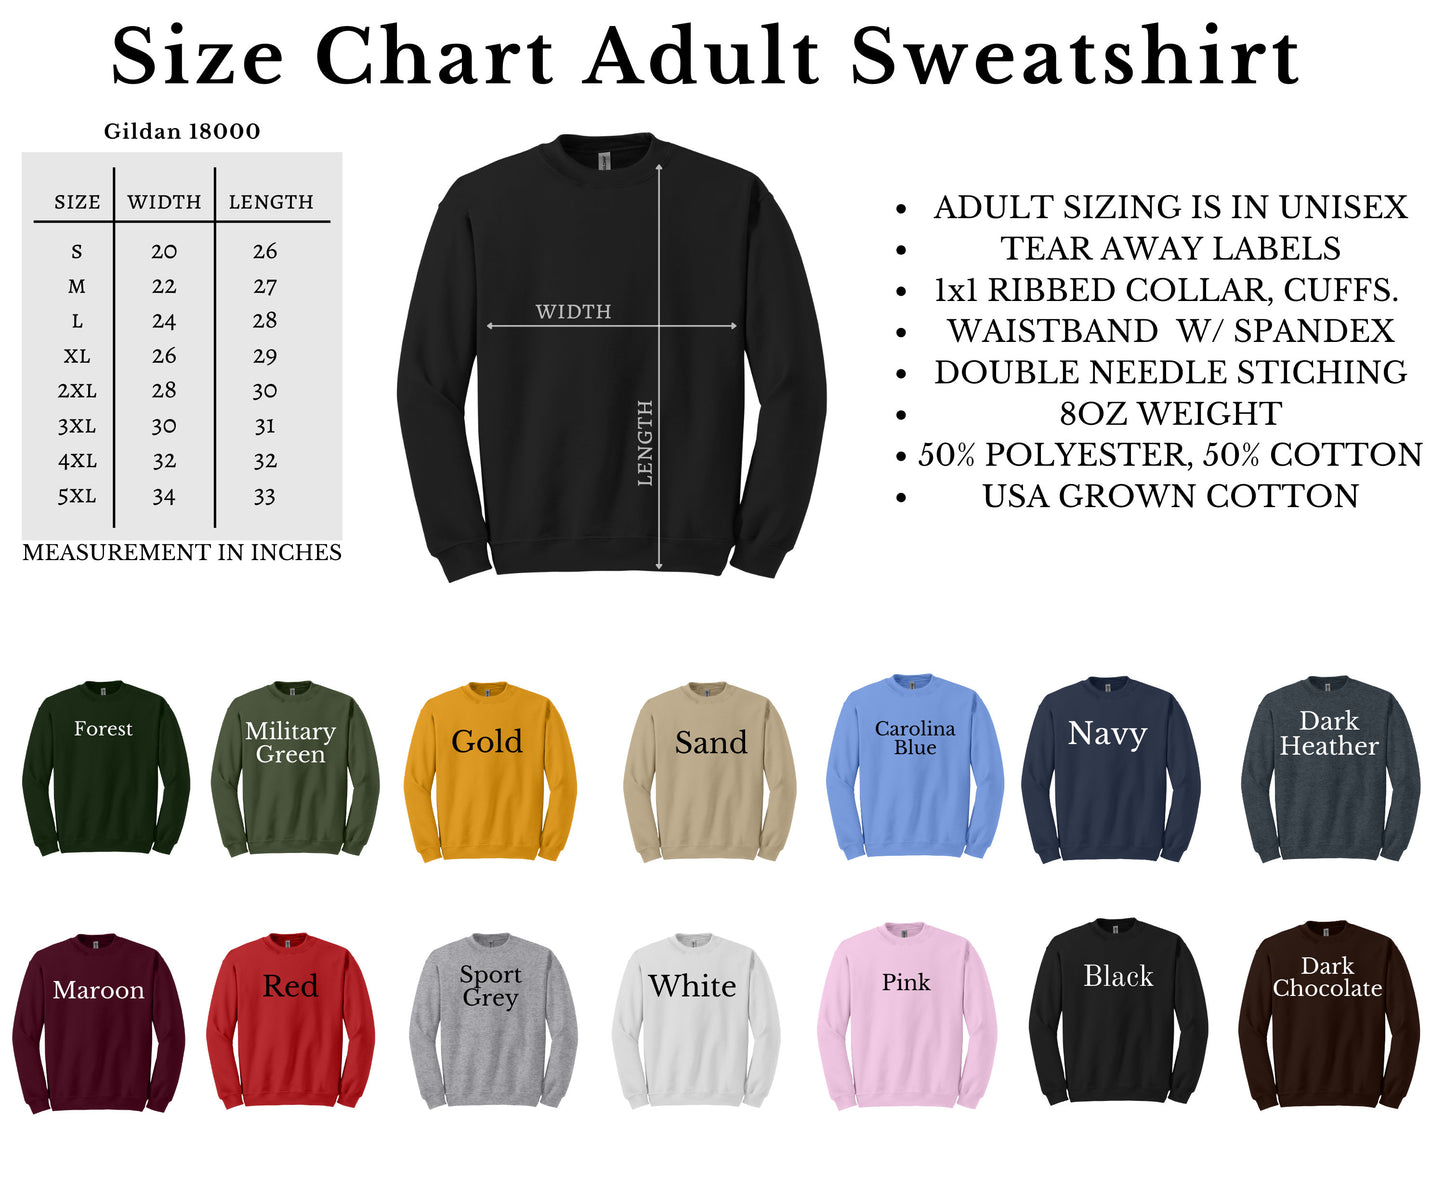 Treat Her Right Sweatshirt, Treat Her Right Tee, Treat Her Right Crewneck, Crewneck Sweatshirt, Oversized Sweater, Comfy Sweater, Sexy Tee